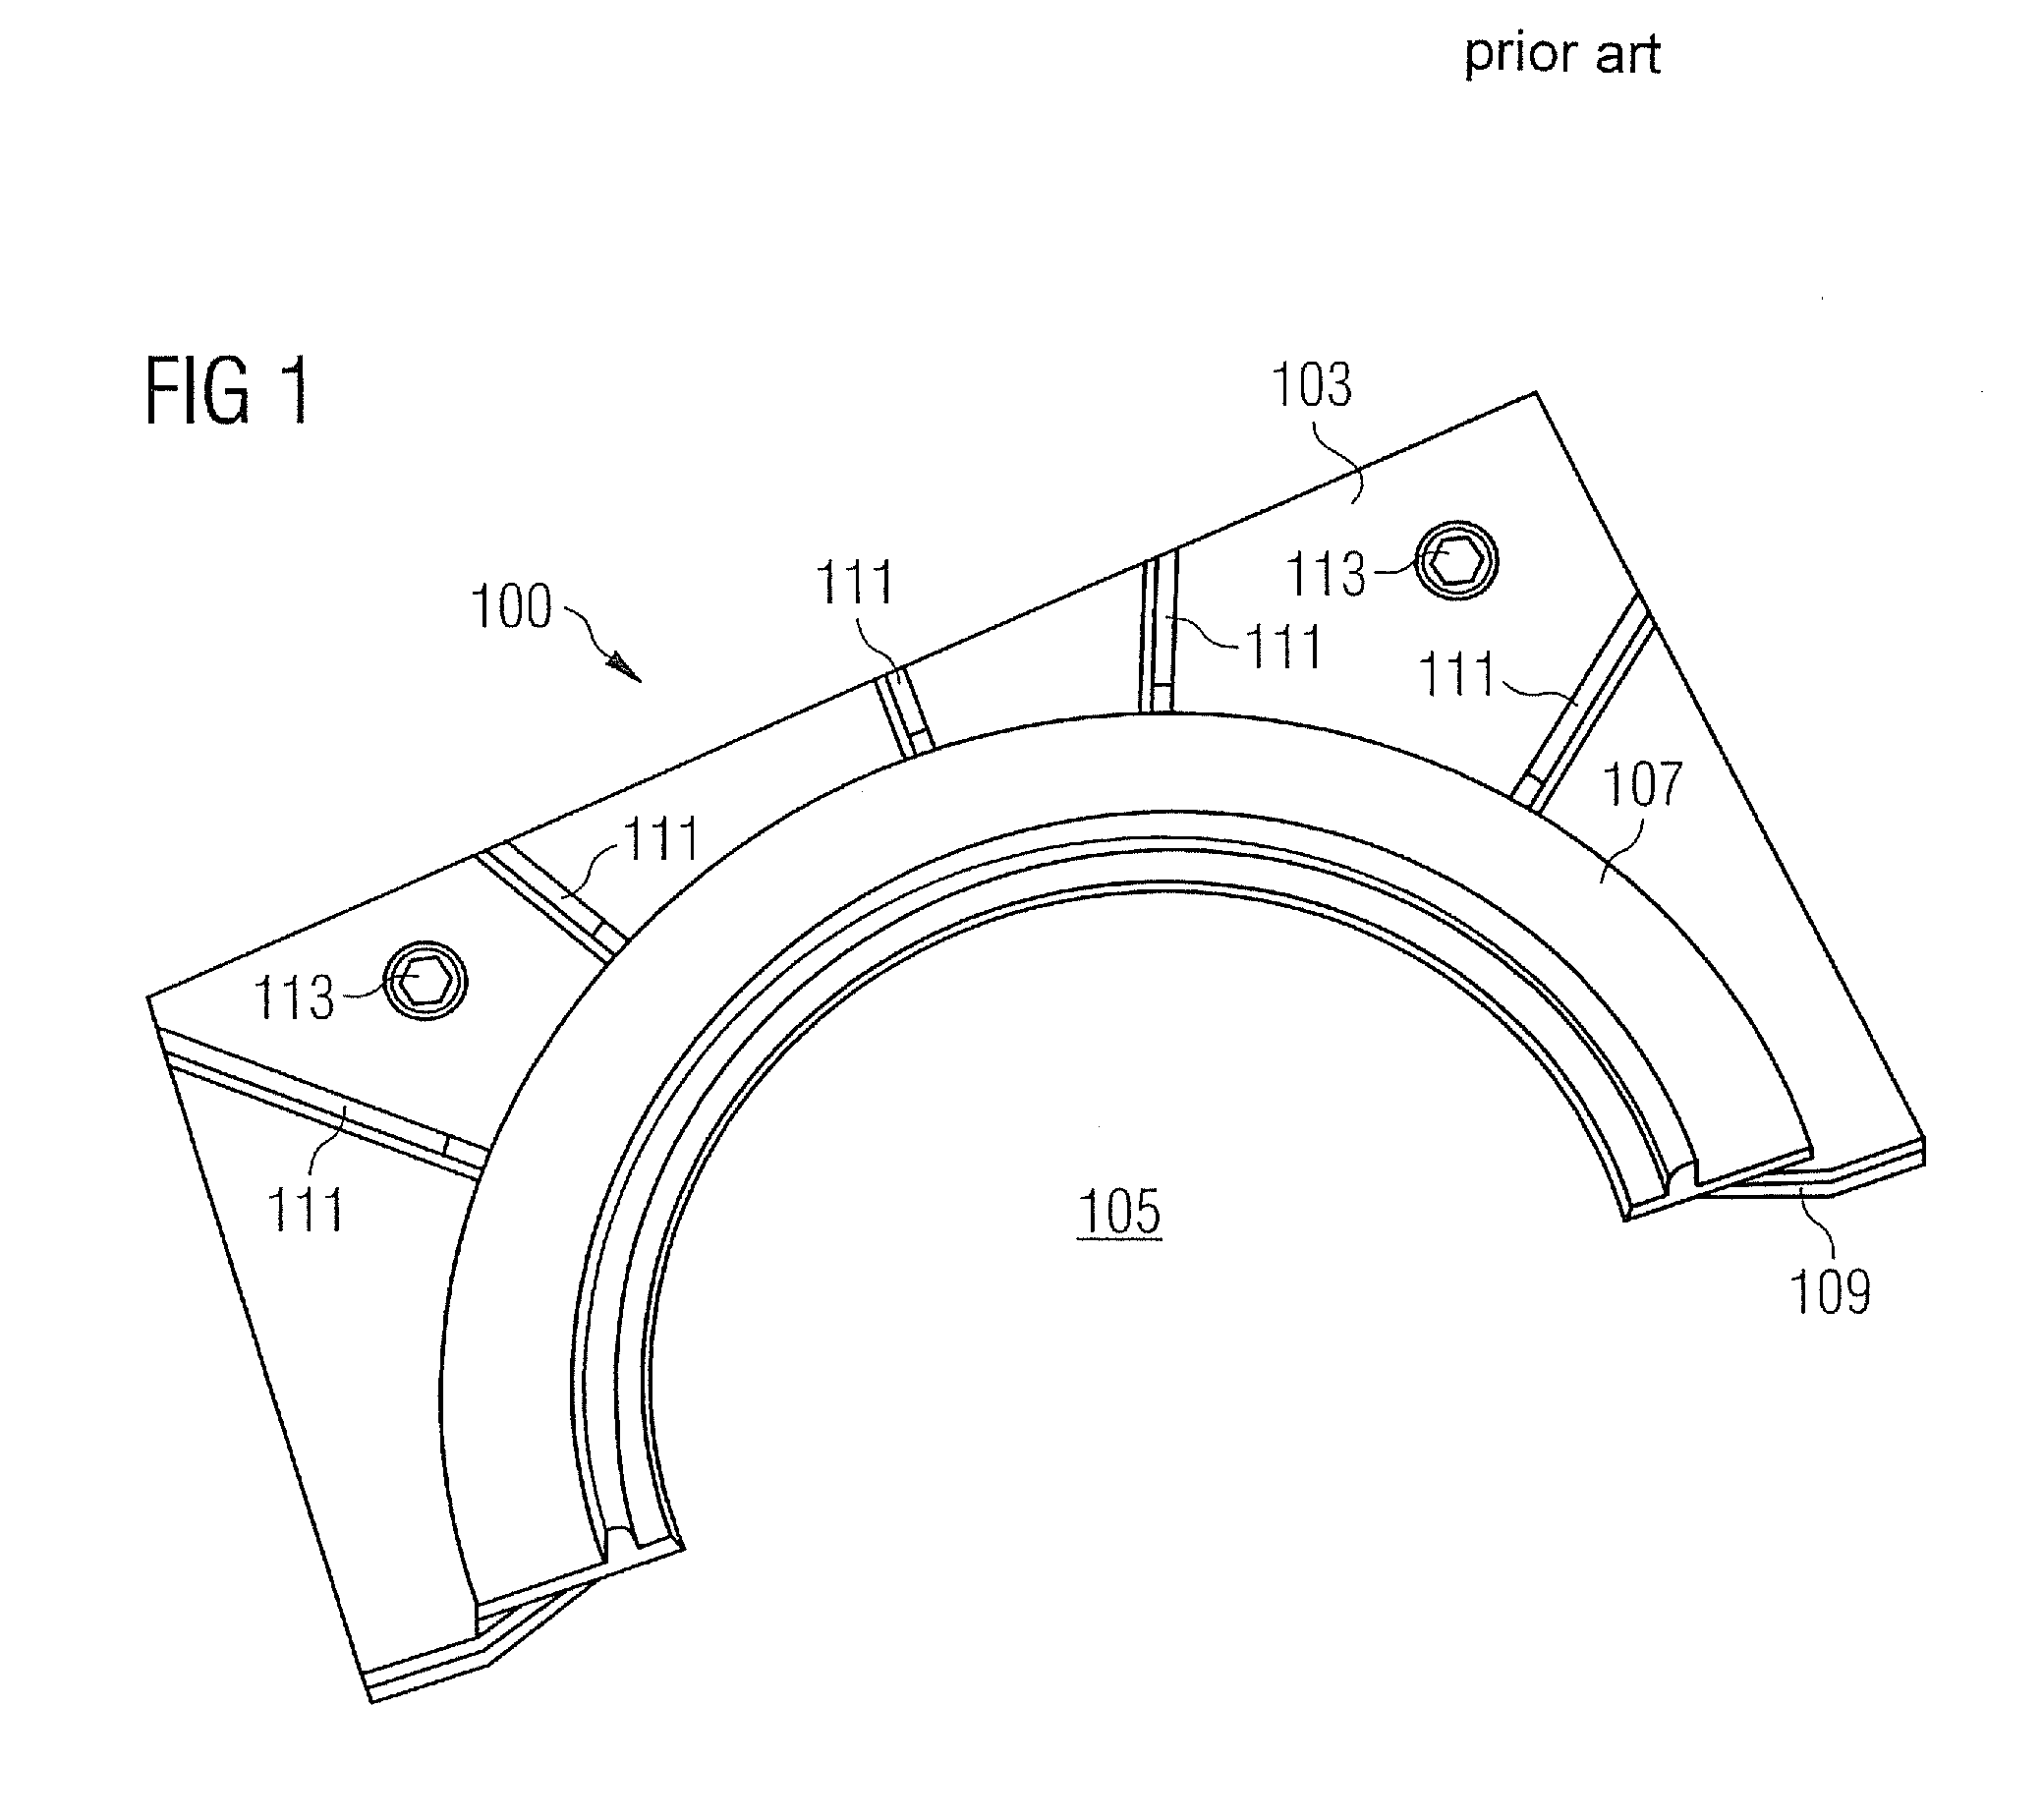 Burner inserts for a gas turbine combustion chamber and gas turbine